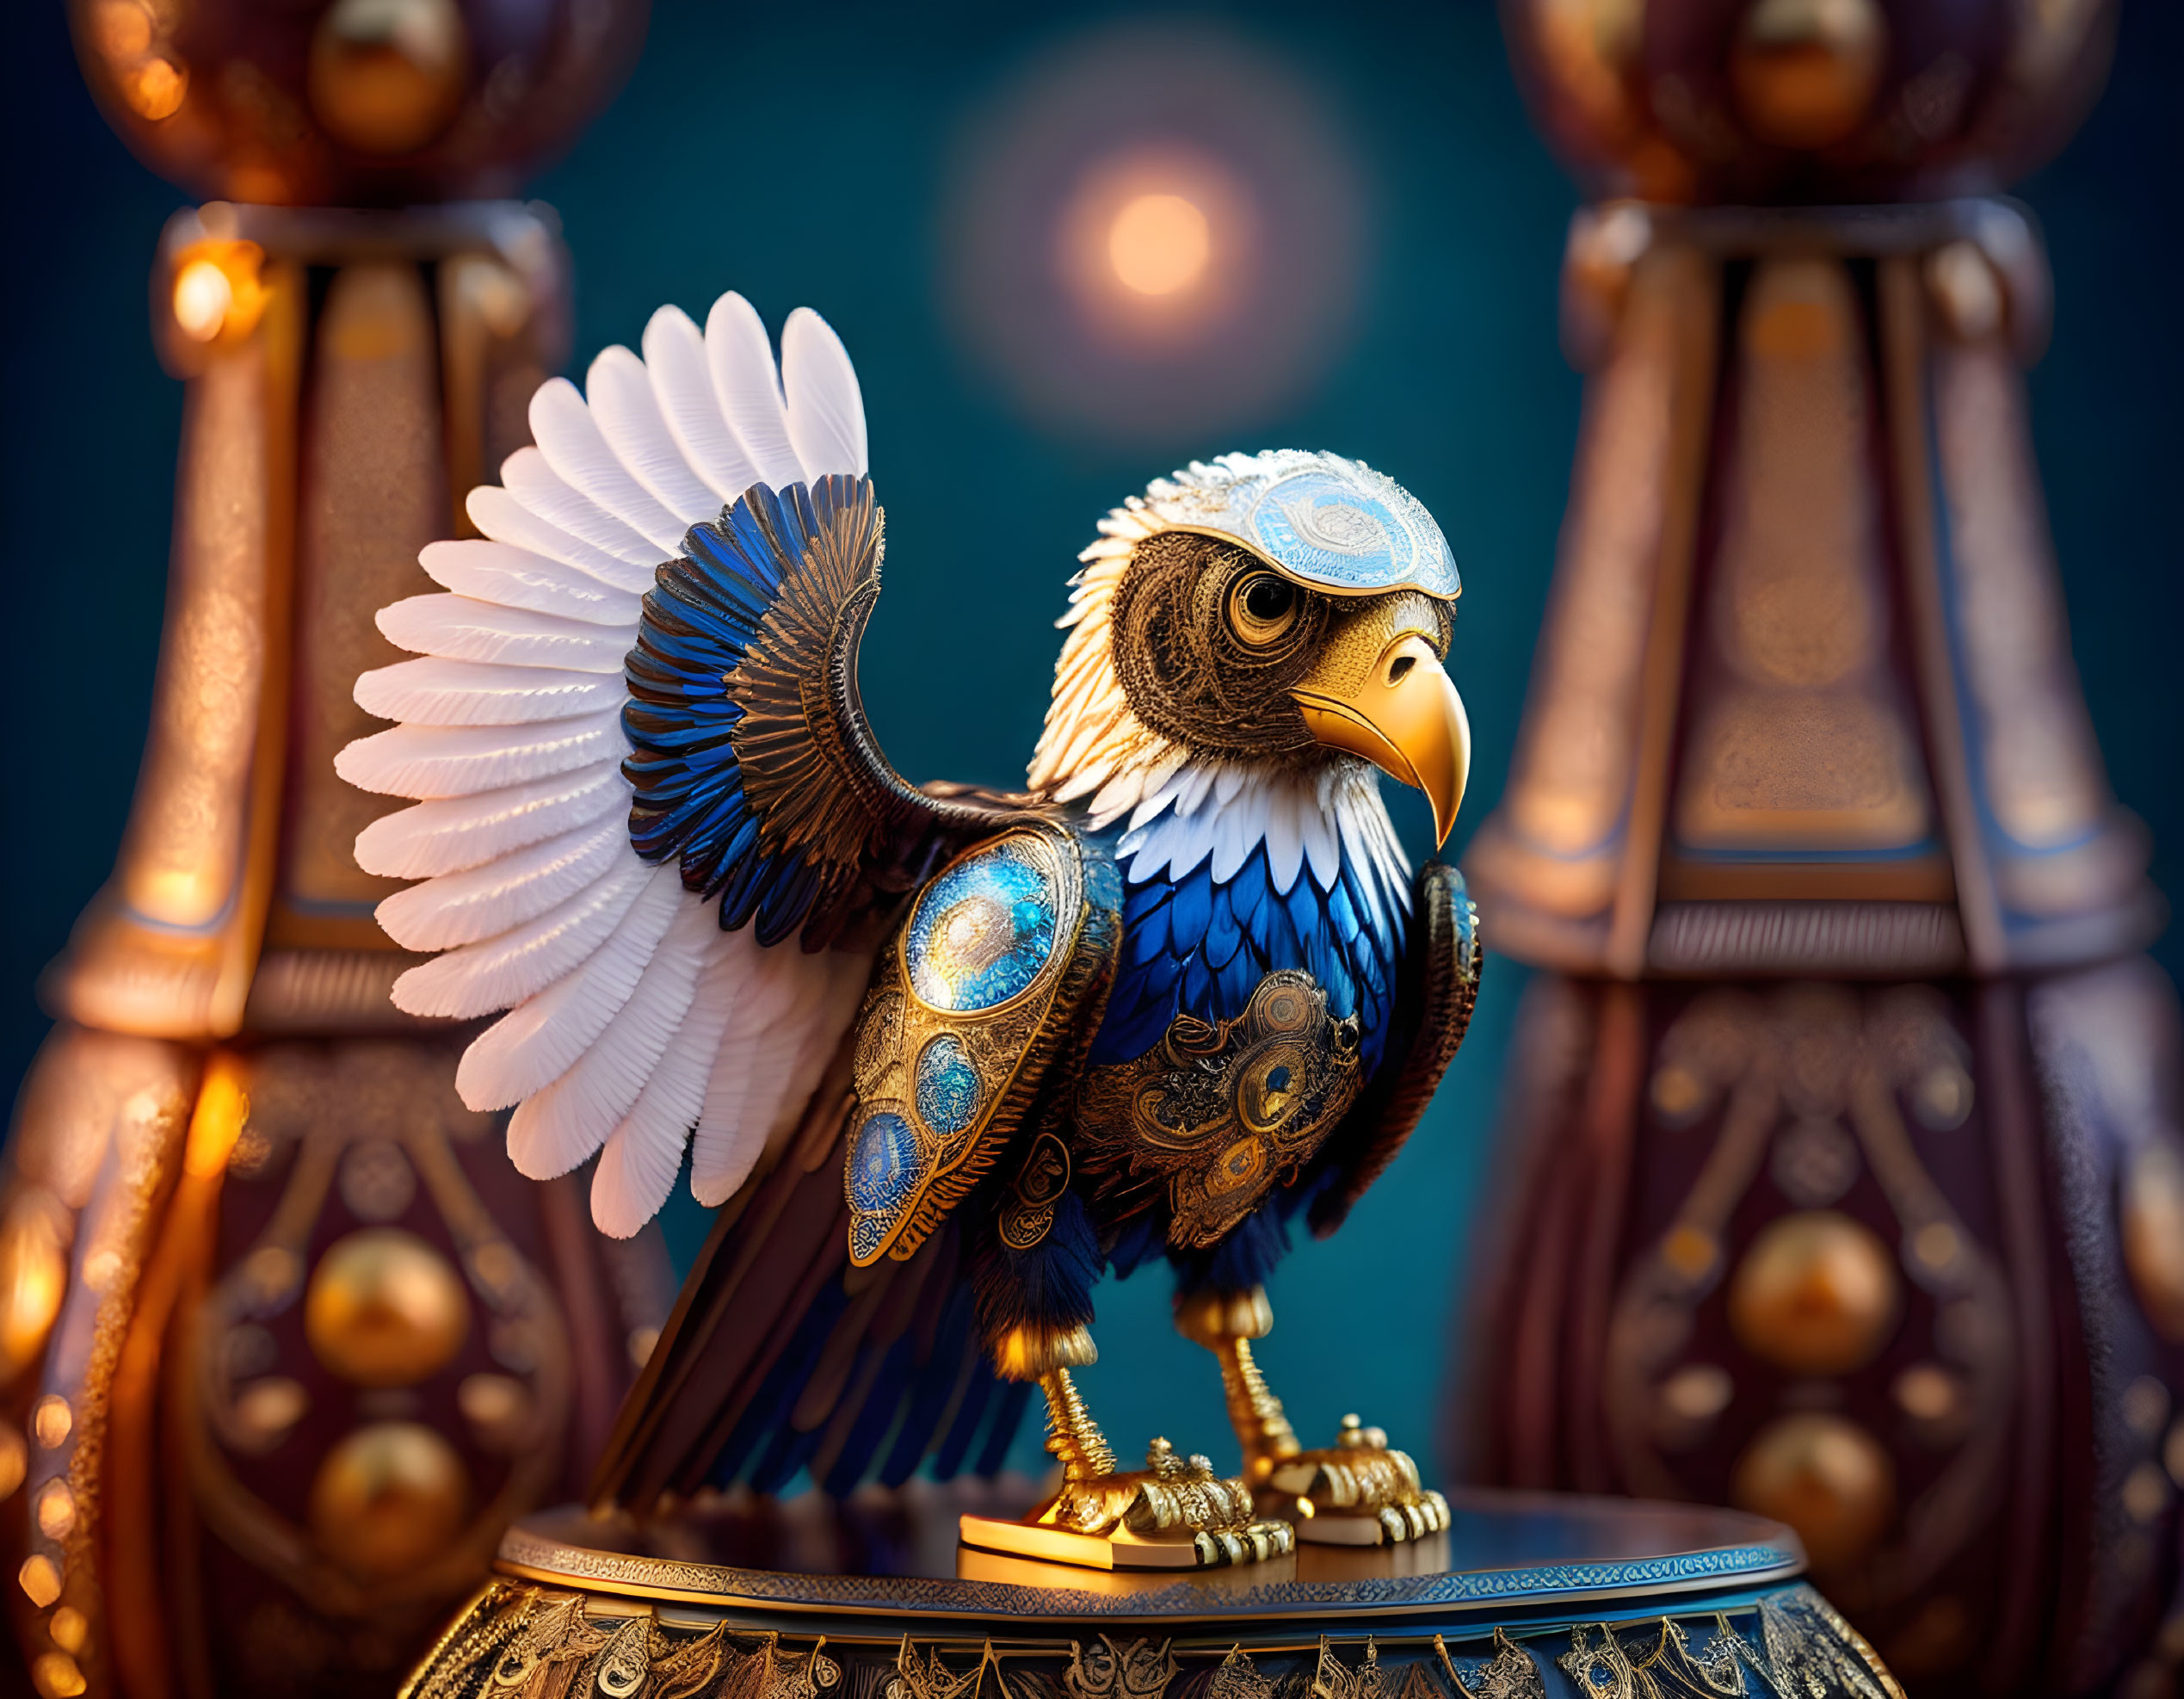 Detailed eagle artwork with gold and blue patterns on chess-themed background